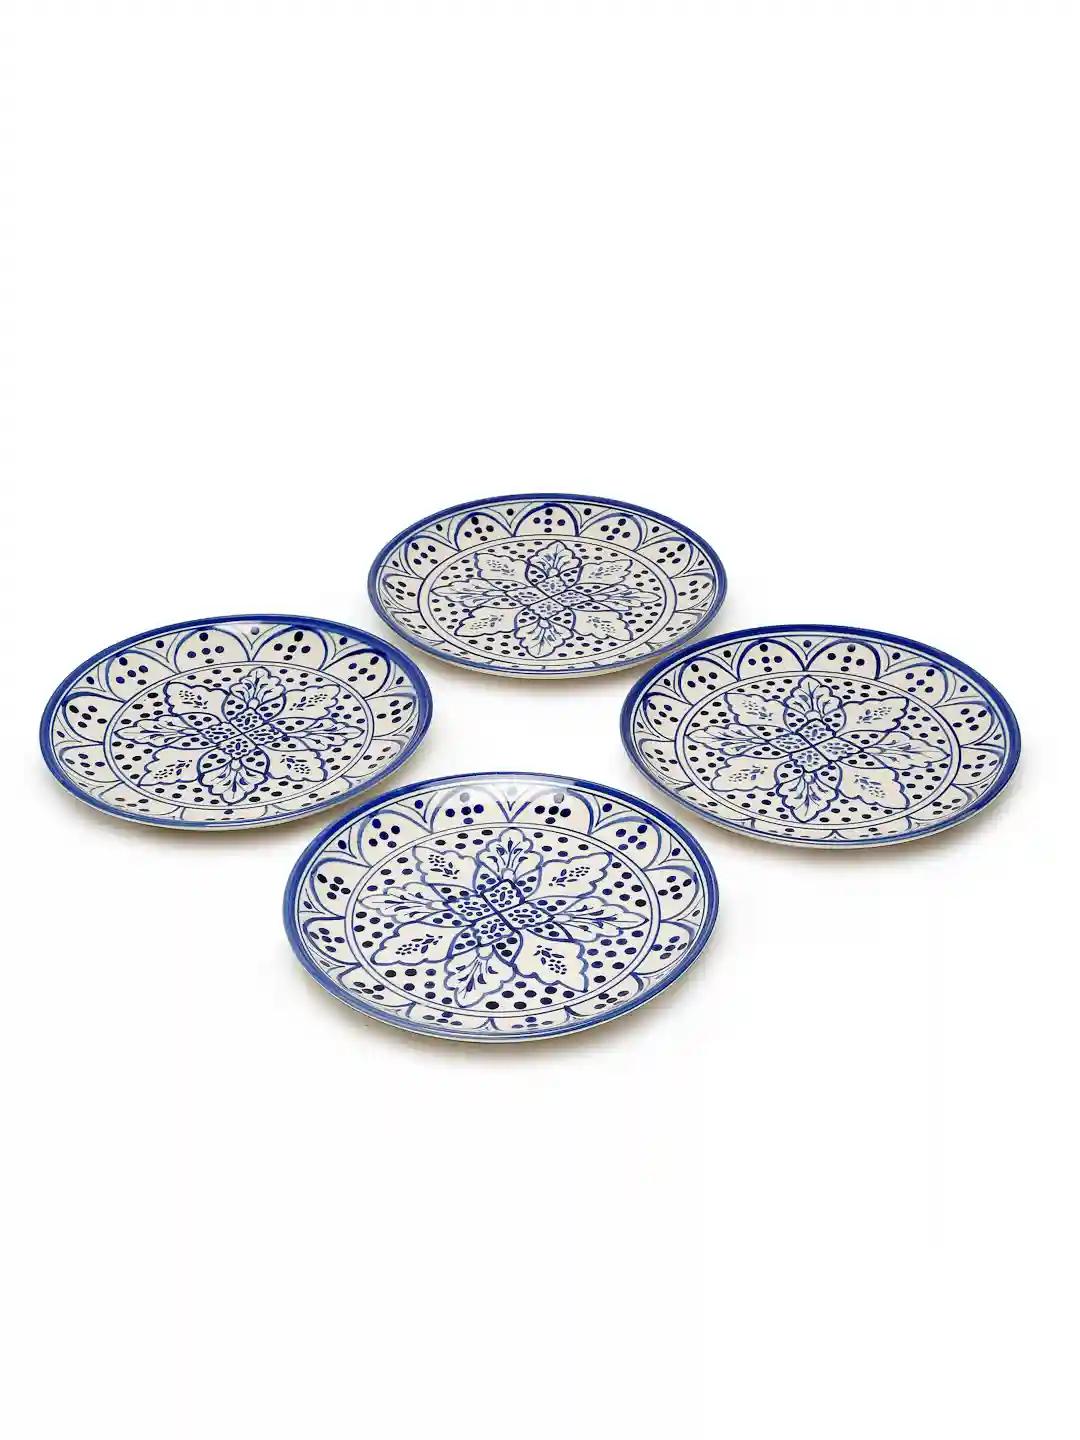 Shilpkara 'Moroccan Bloom' Hand Painted Studio Pottery Ceramic Plates For Dinner 10 Inch